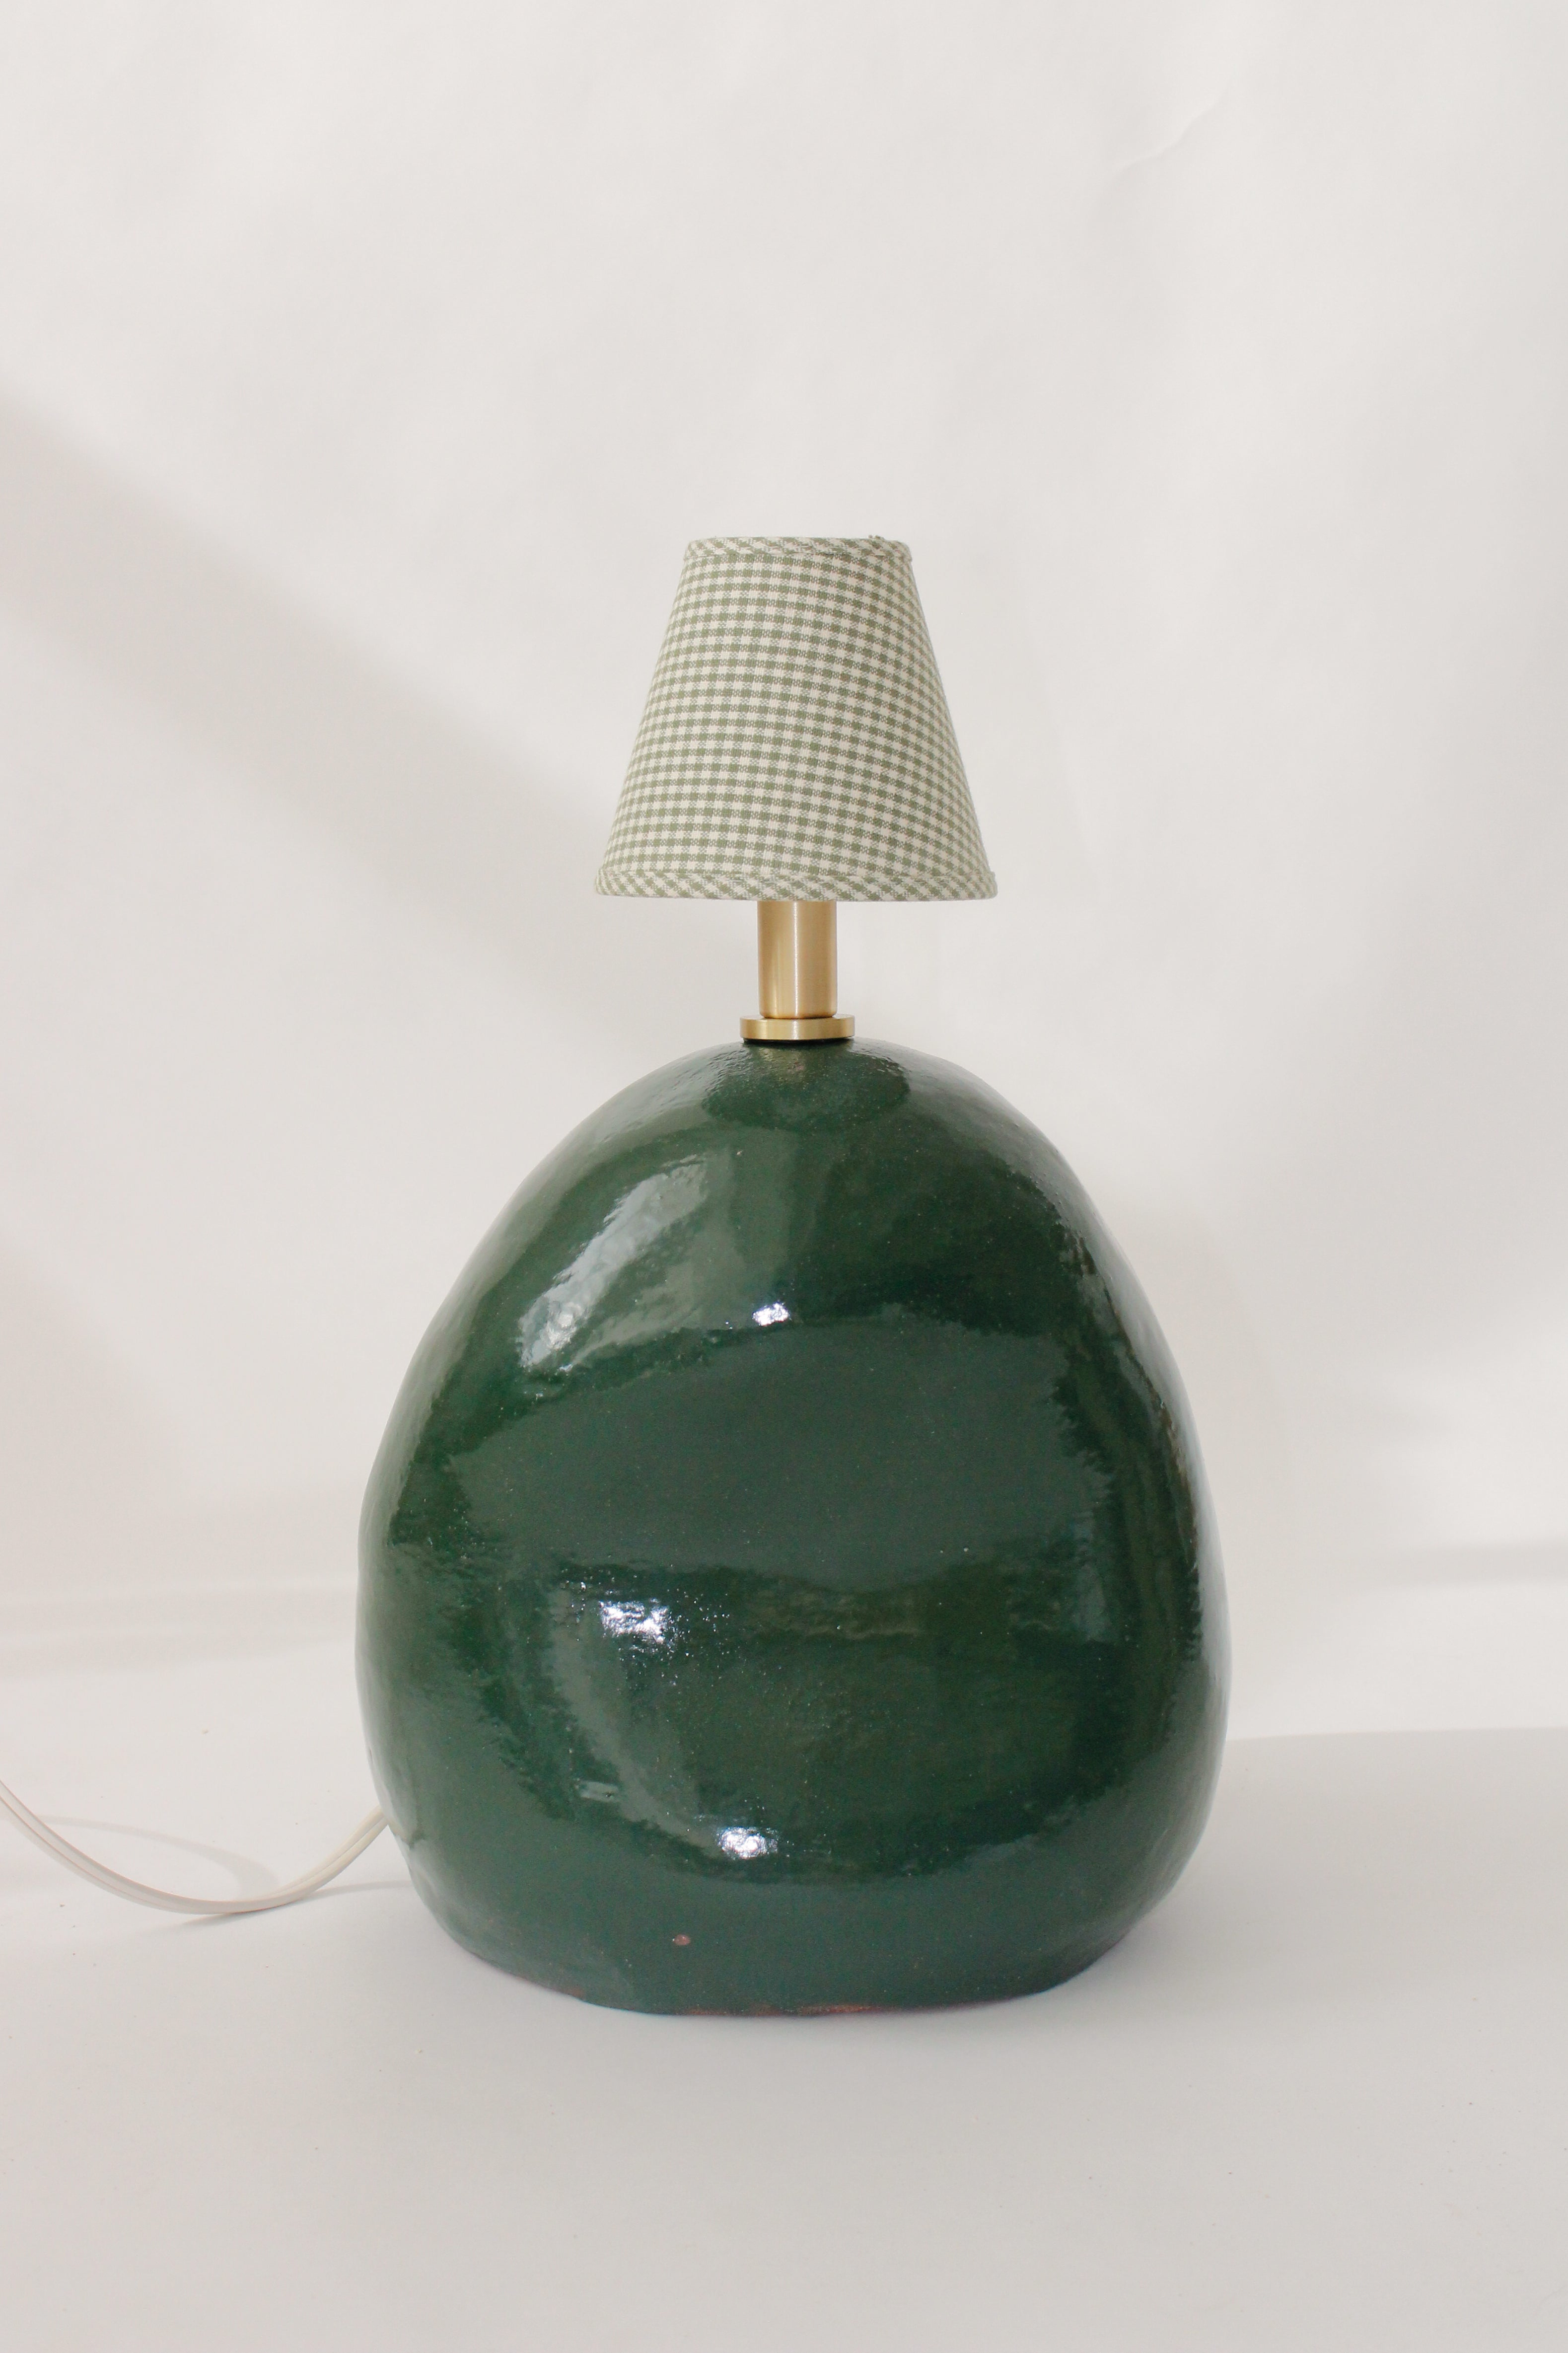 green lamp with checkered shade